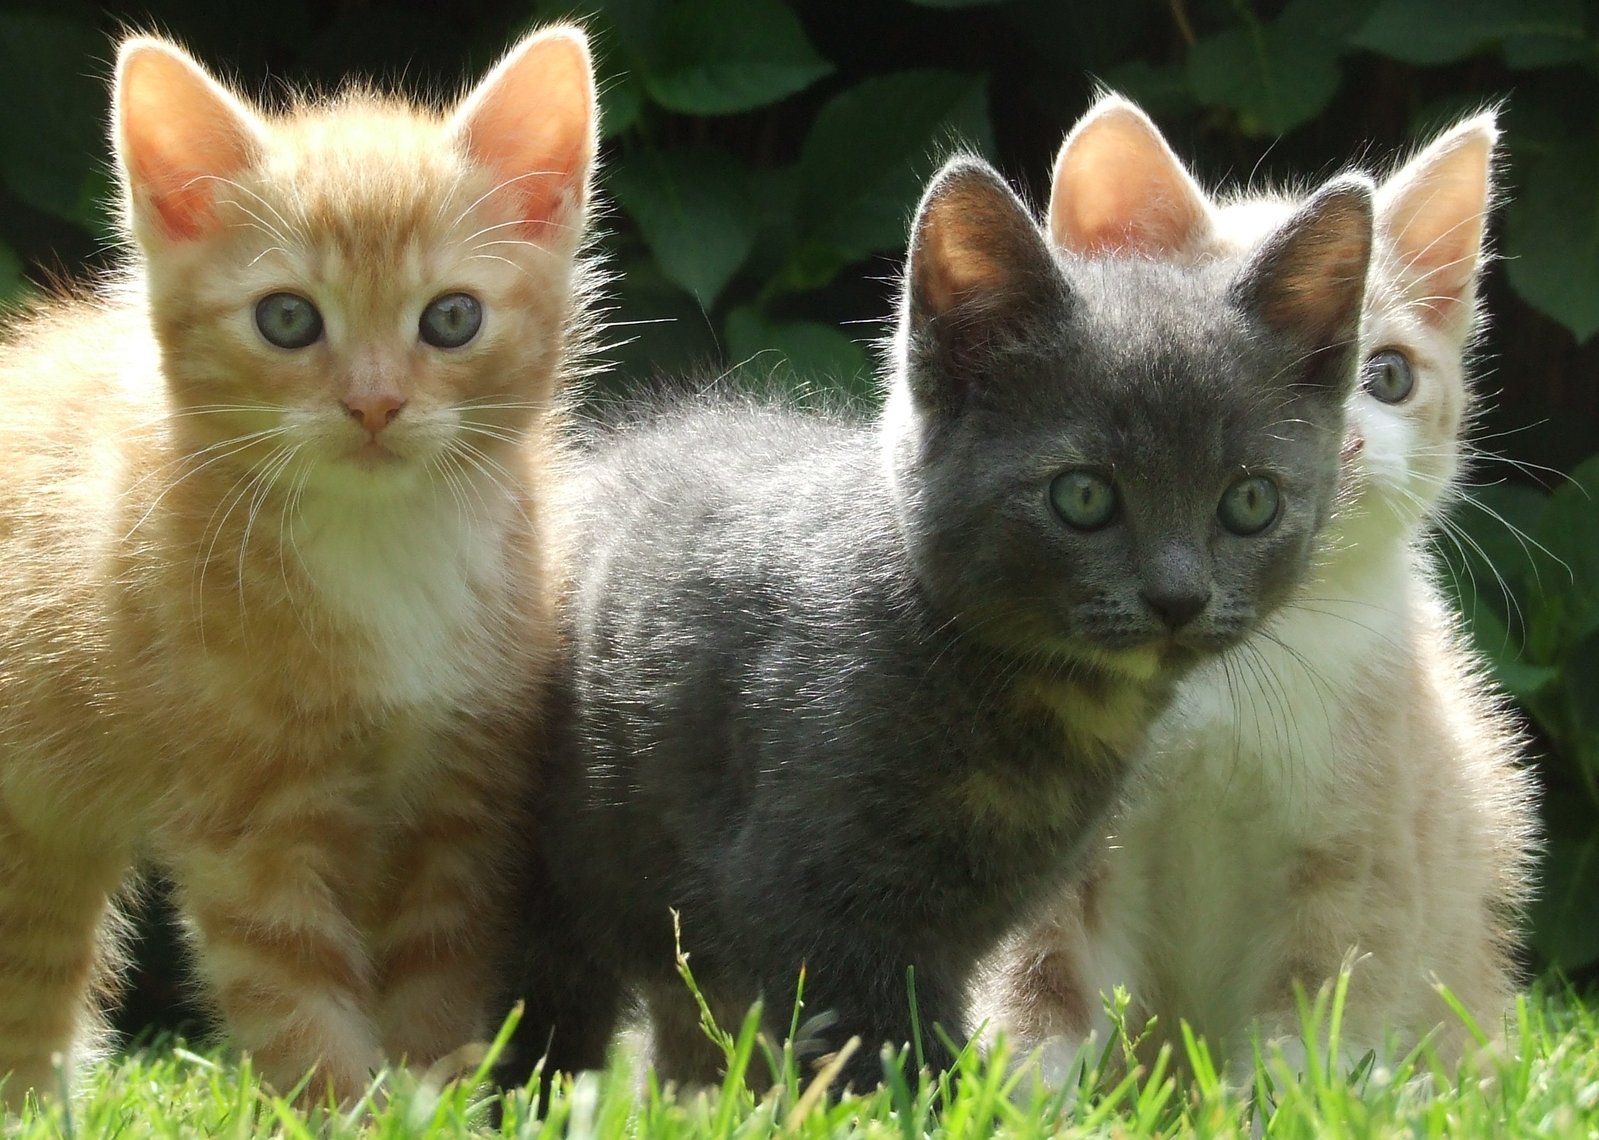 three small kittens standing on the grass